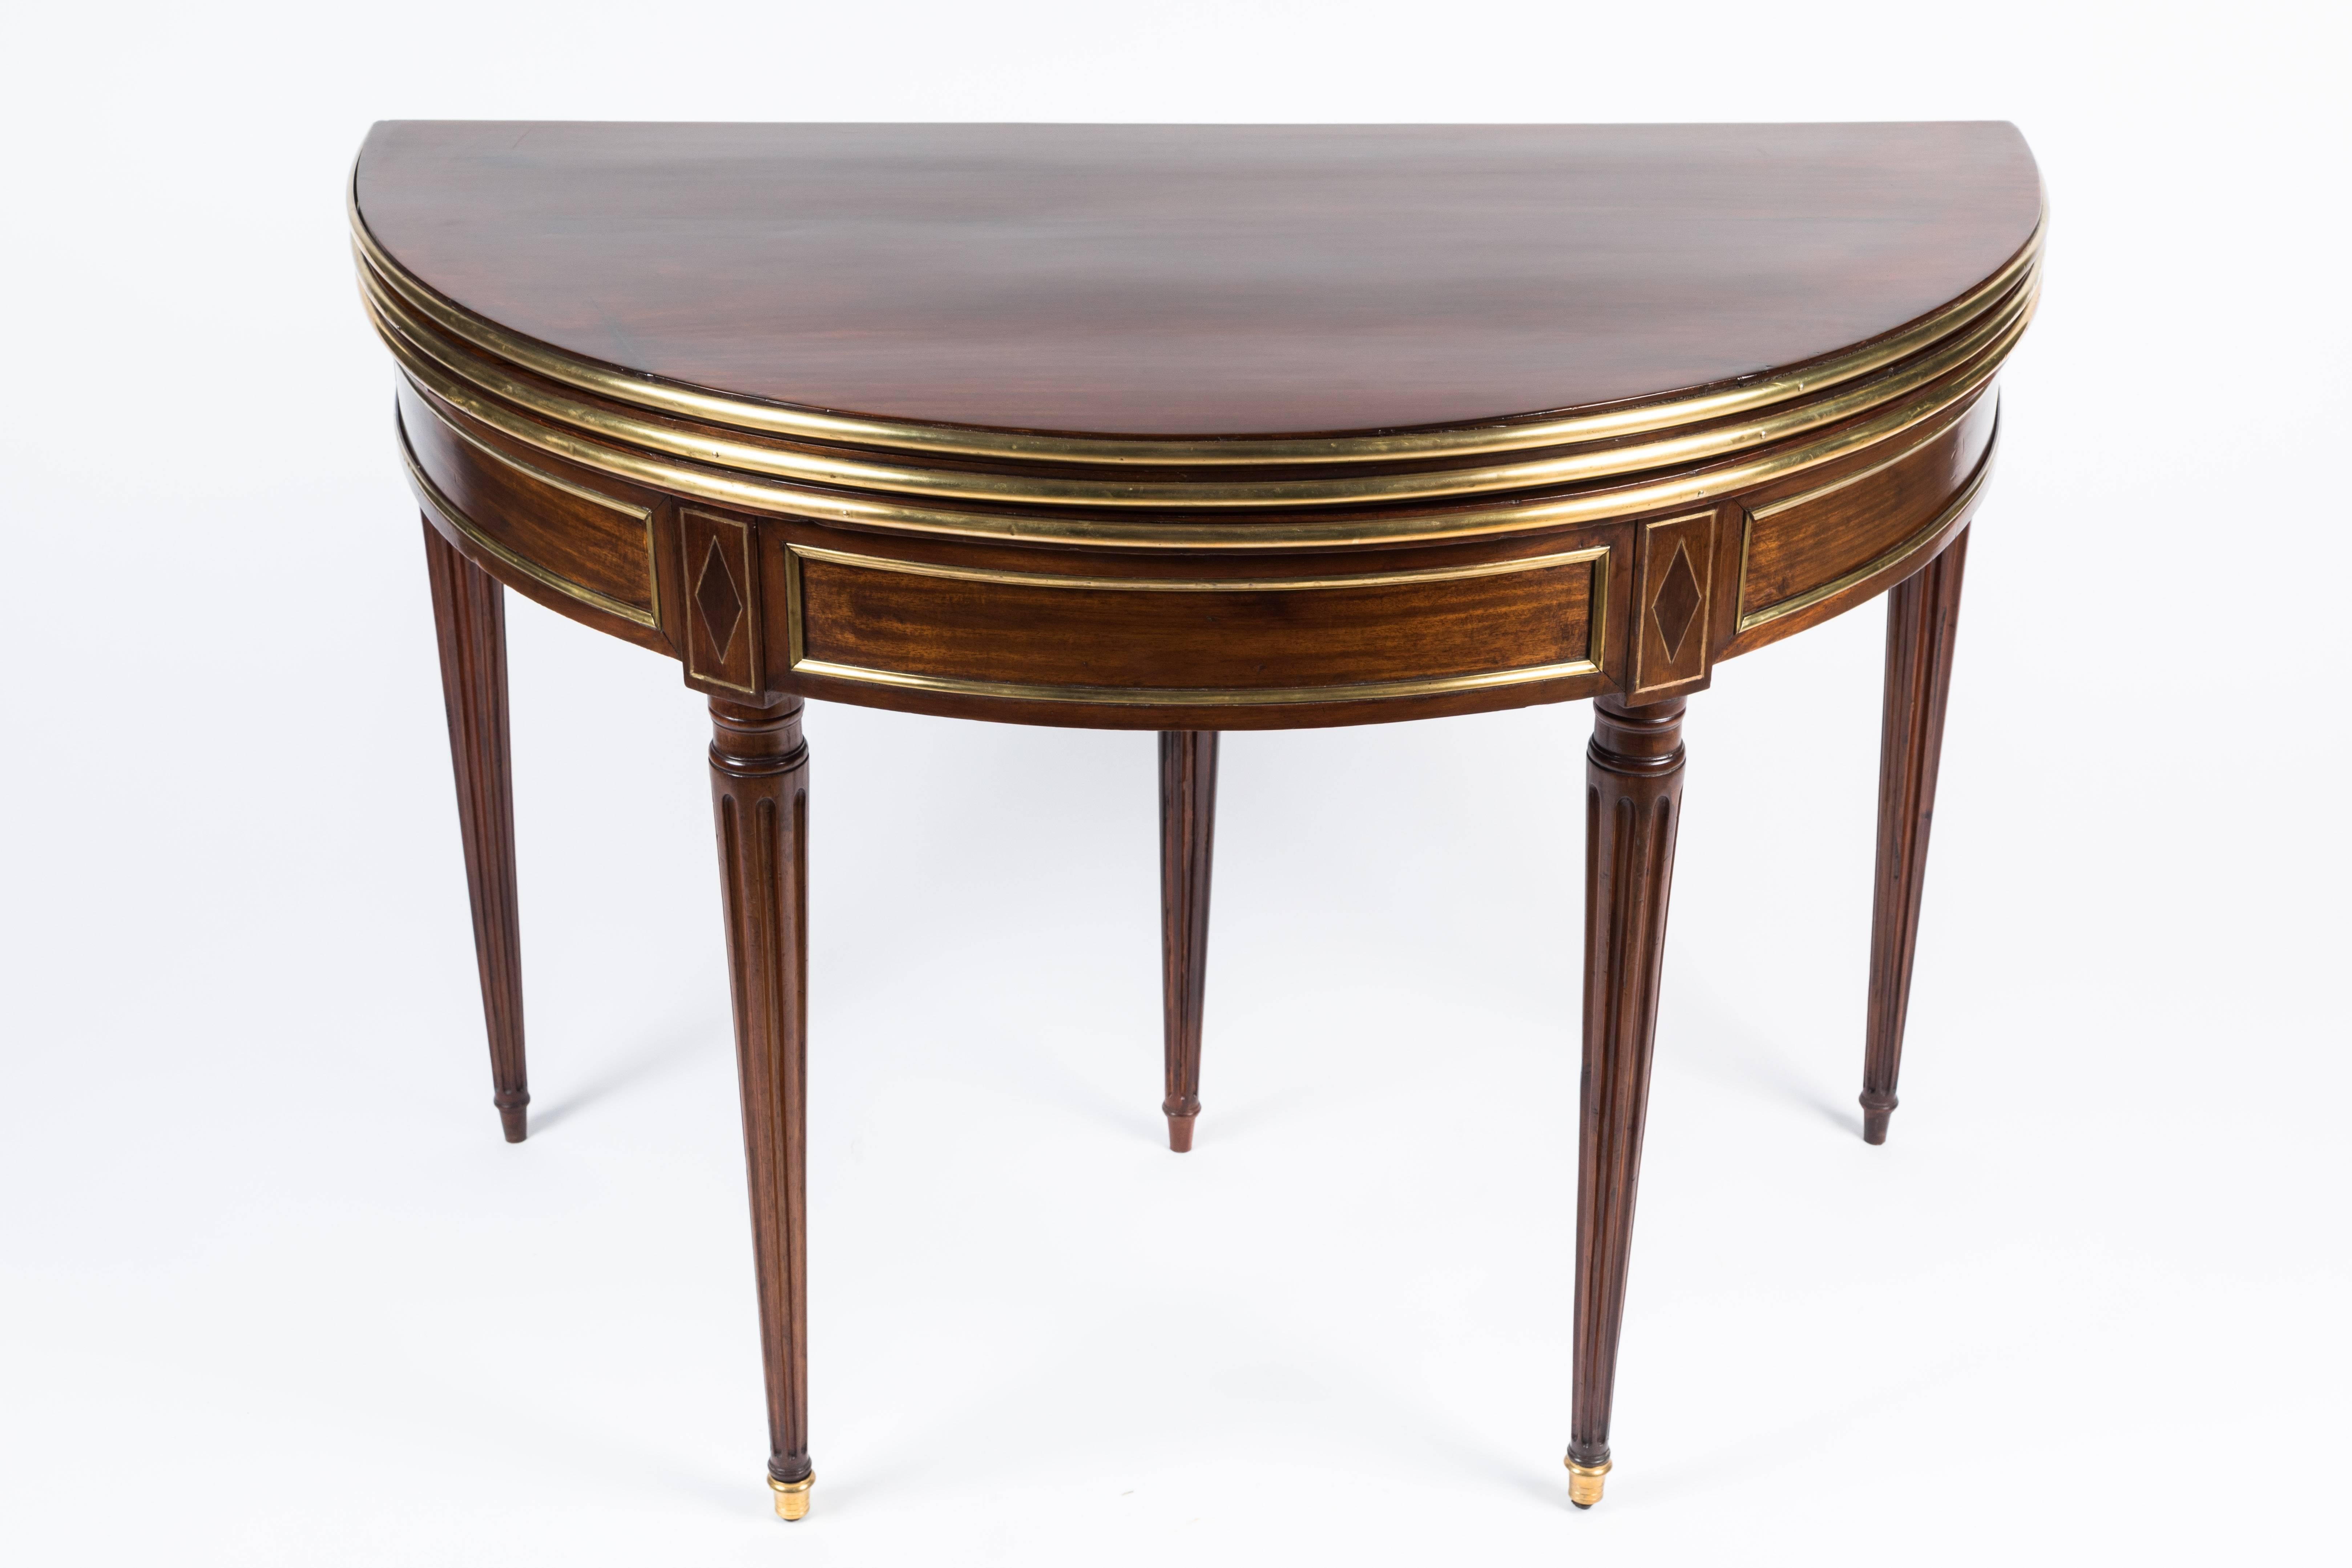 Newly restored French 18th century Louis XVI flip-top demilune console table in mahogany, with ormolu mounts and gilt inlay. Flips open to reveal new purple felt.